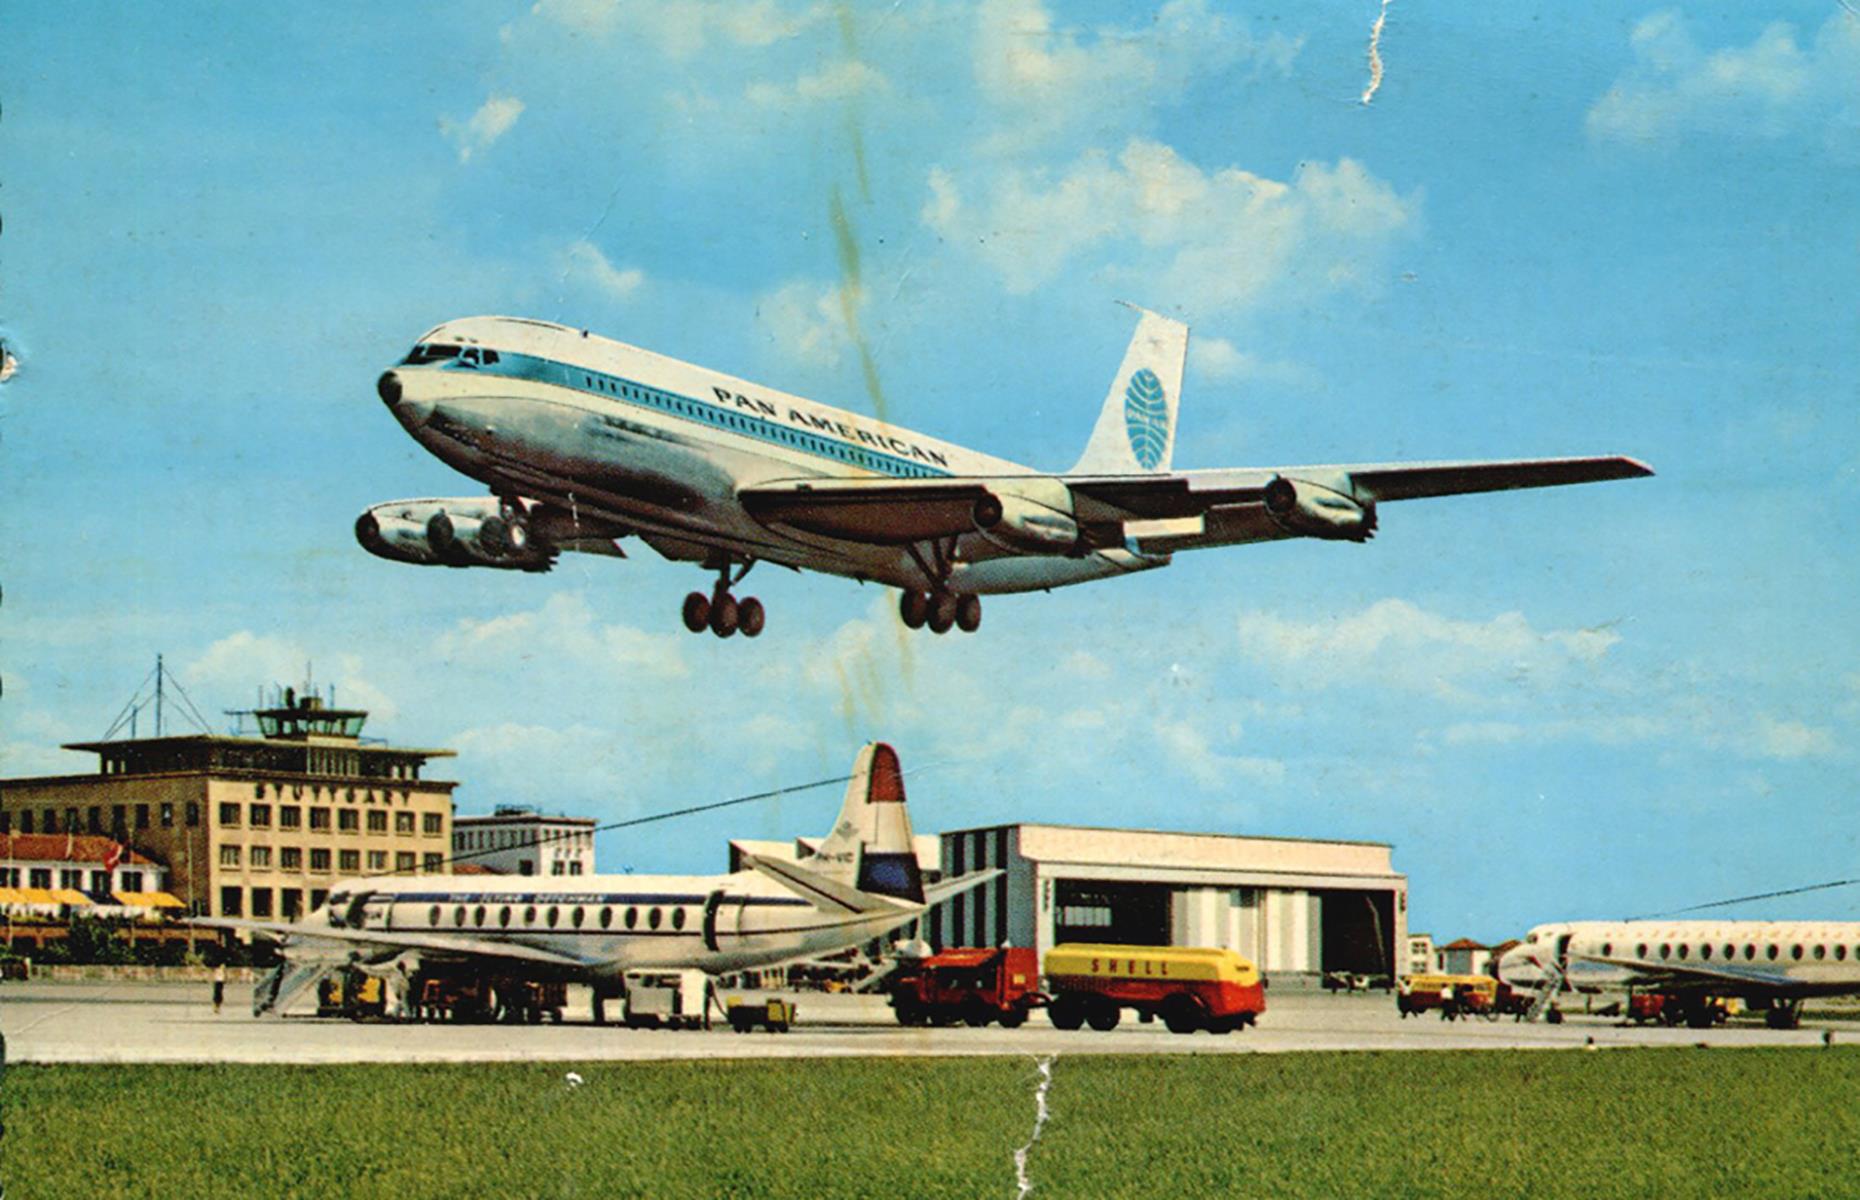 <p>Flying was previously the preserve of the rich but the launch of the Boeing 707 in 1958 opened up air travel to the masses. Compared with the first attempt at the commercial jetliner in 1952, the 707 was faster and carried five times as many people. The size and efficiency of the Boeing 747, launched in 1970, decreased fares even further.</p>